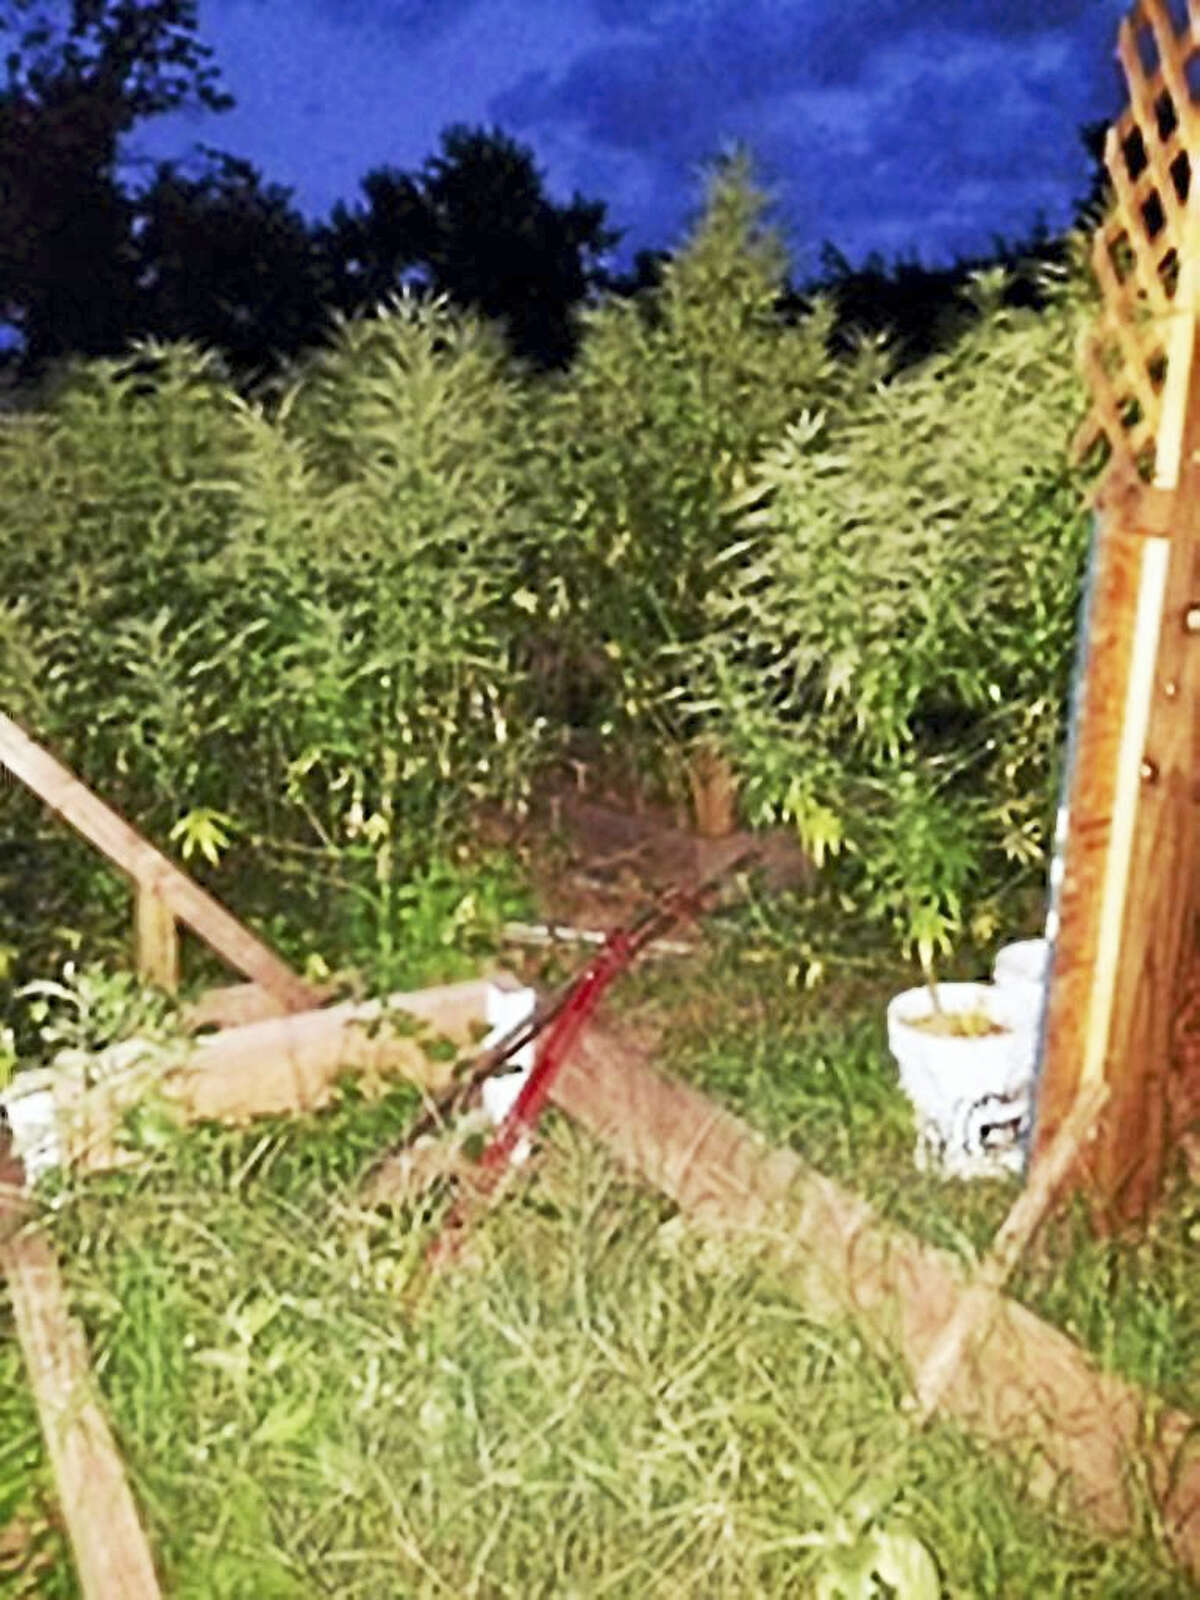 Authorities allegedly discovered an estimate 600 marijuana plants in the backyard of a day care center.